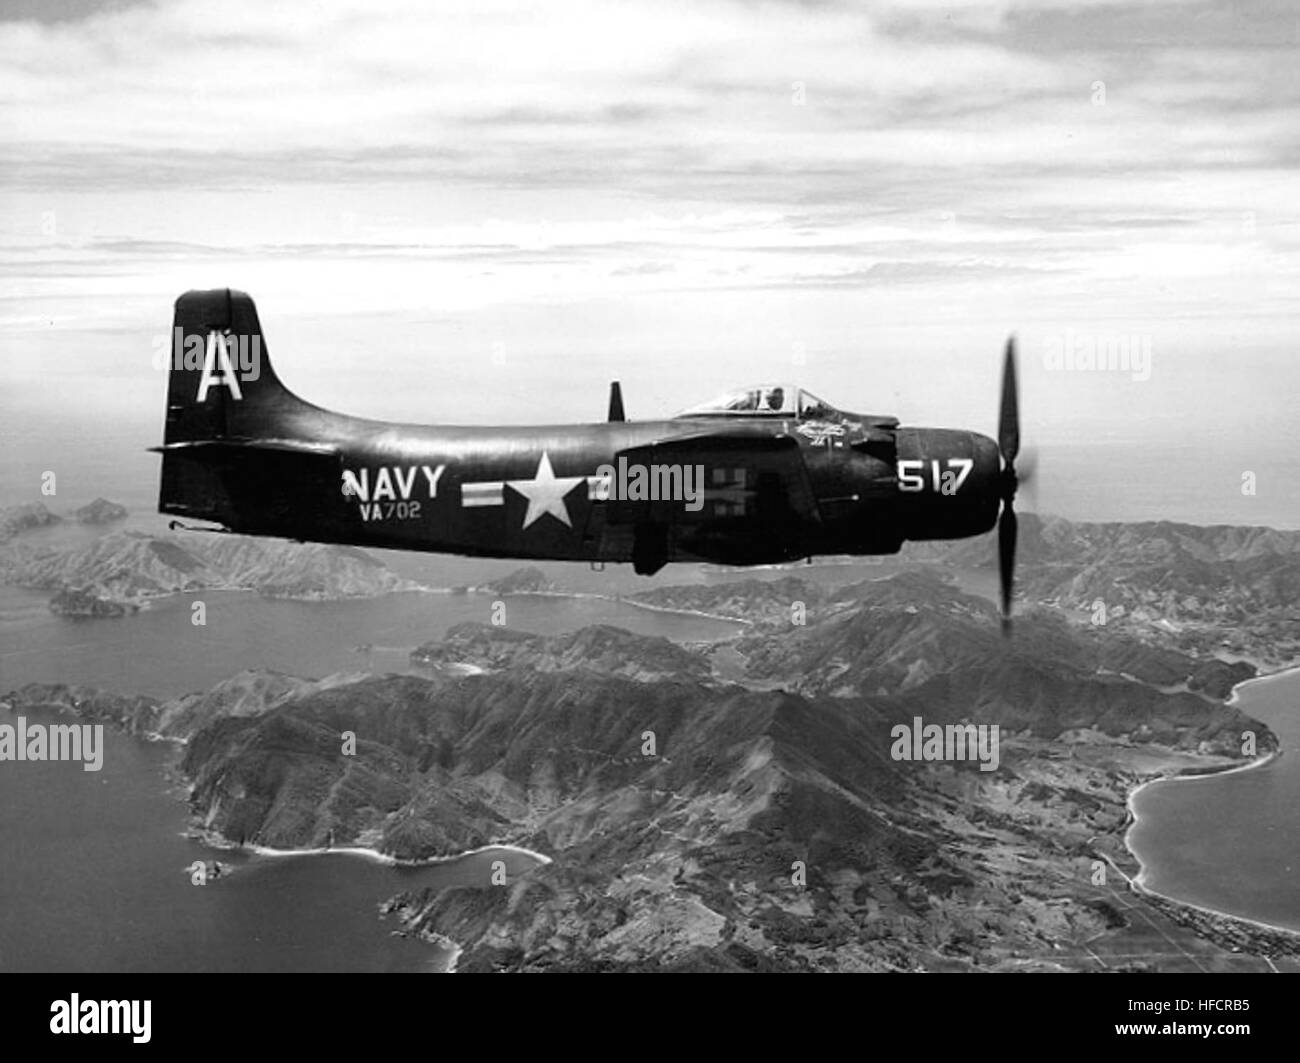 Photo #: 80-G-435040  Douglas AD-2 Skyraider attack plane (Bureau # 122343), of Attack Squadron 702 (VA-702)  Over the Japanese islands, after being launched on a routine flight from USS Boxer (CV-21) in September 1951. The ship was then en route to the Korean combat area.  Official U.S. Navy Photograph, now in the collections of the National Archives. AD-2 Skyraider of VA-702 over Japan in September 1951 Stock Photo